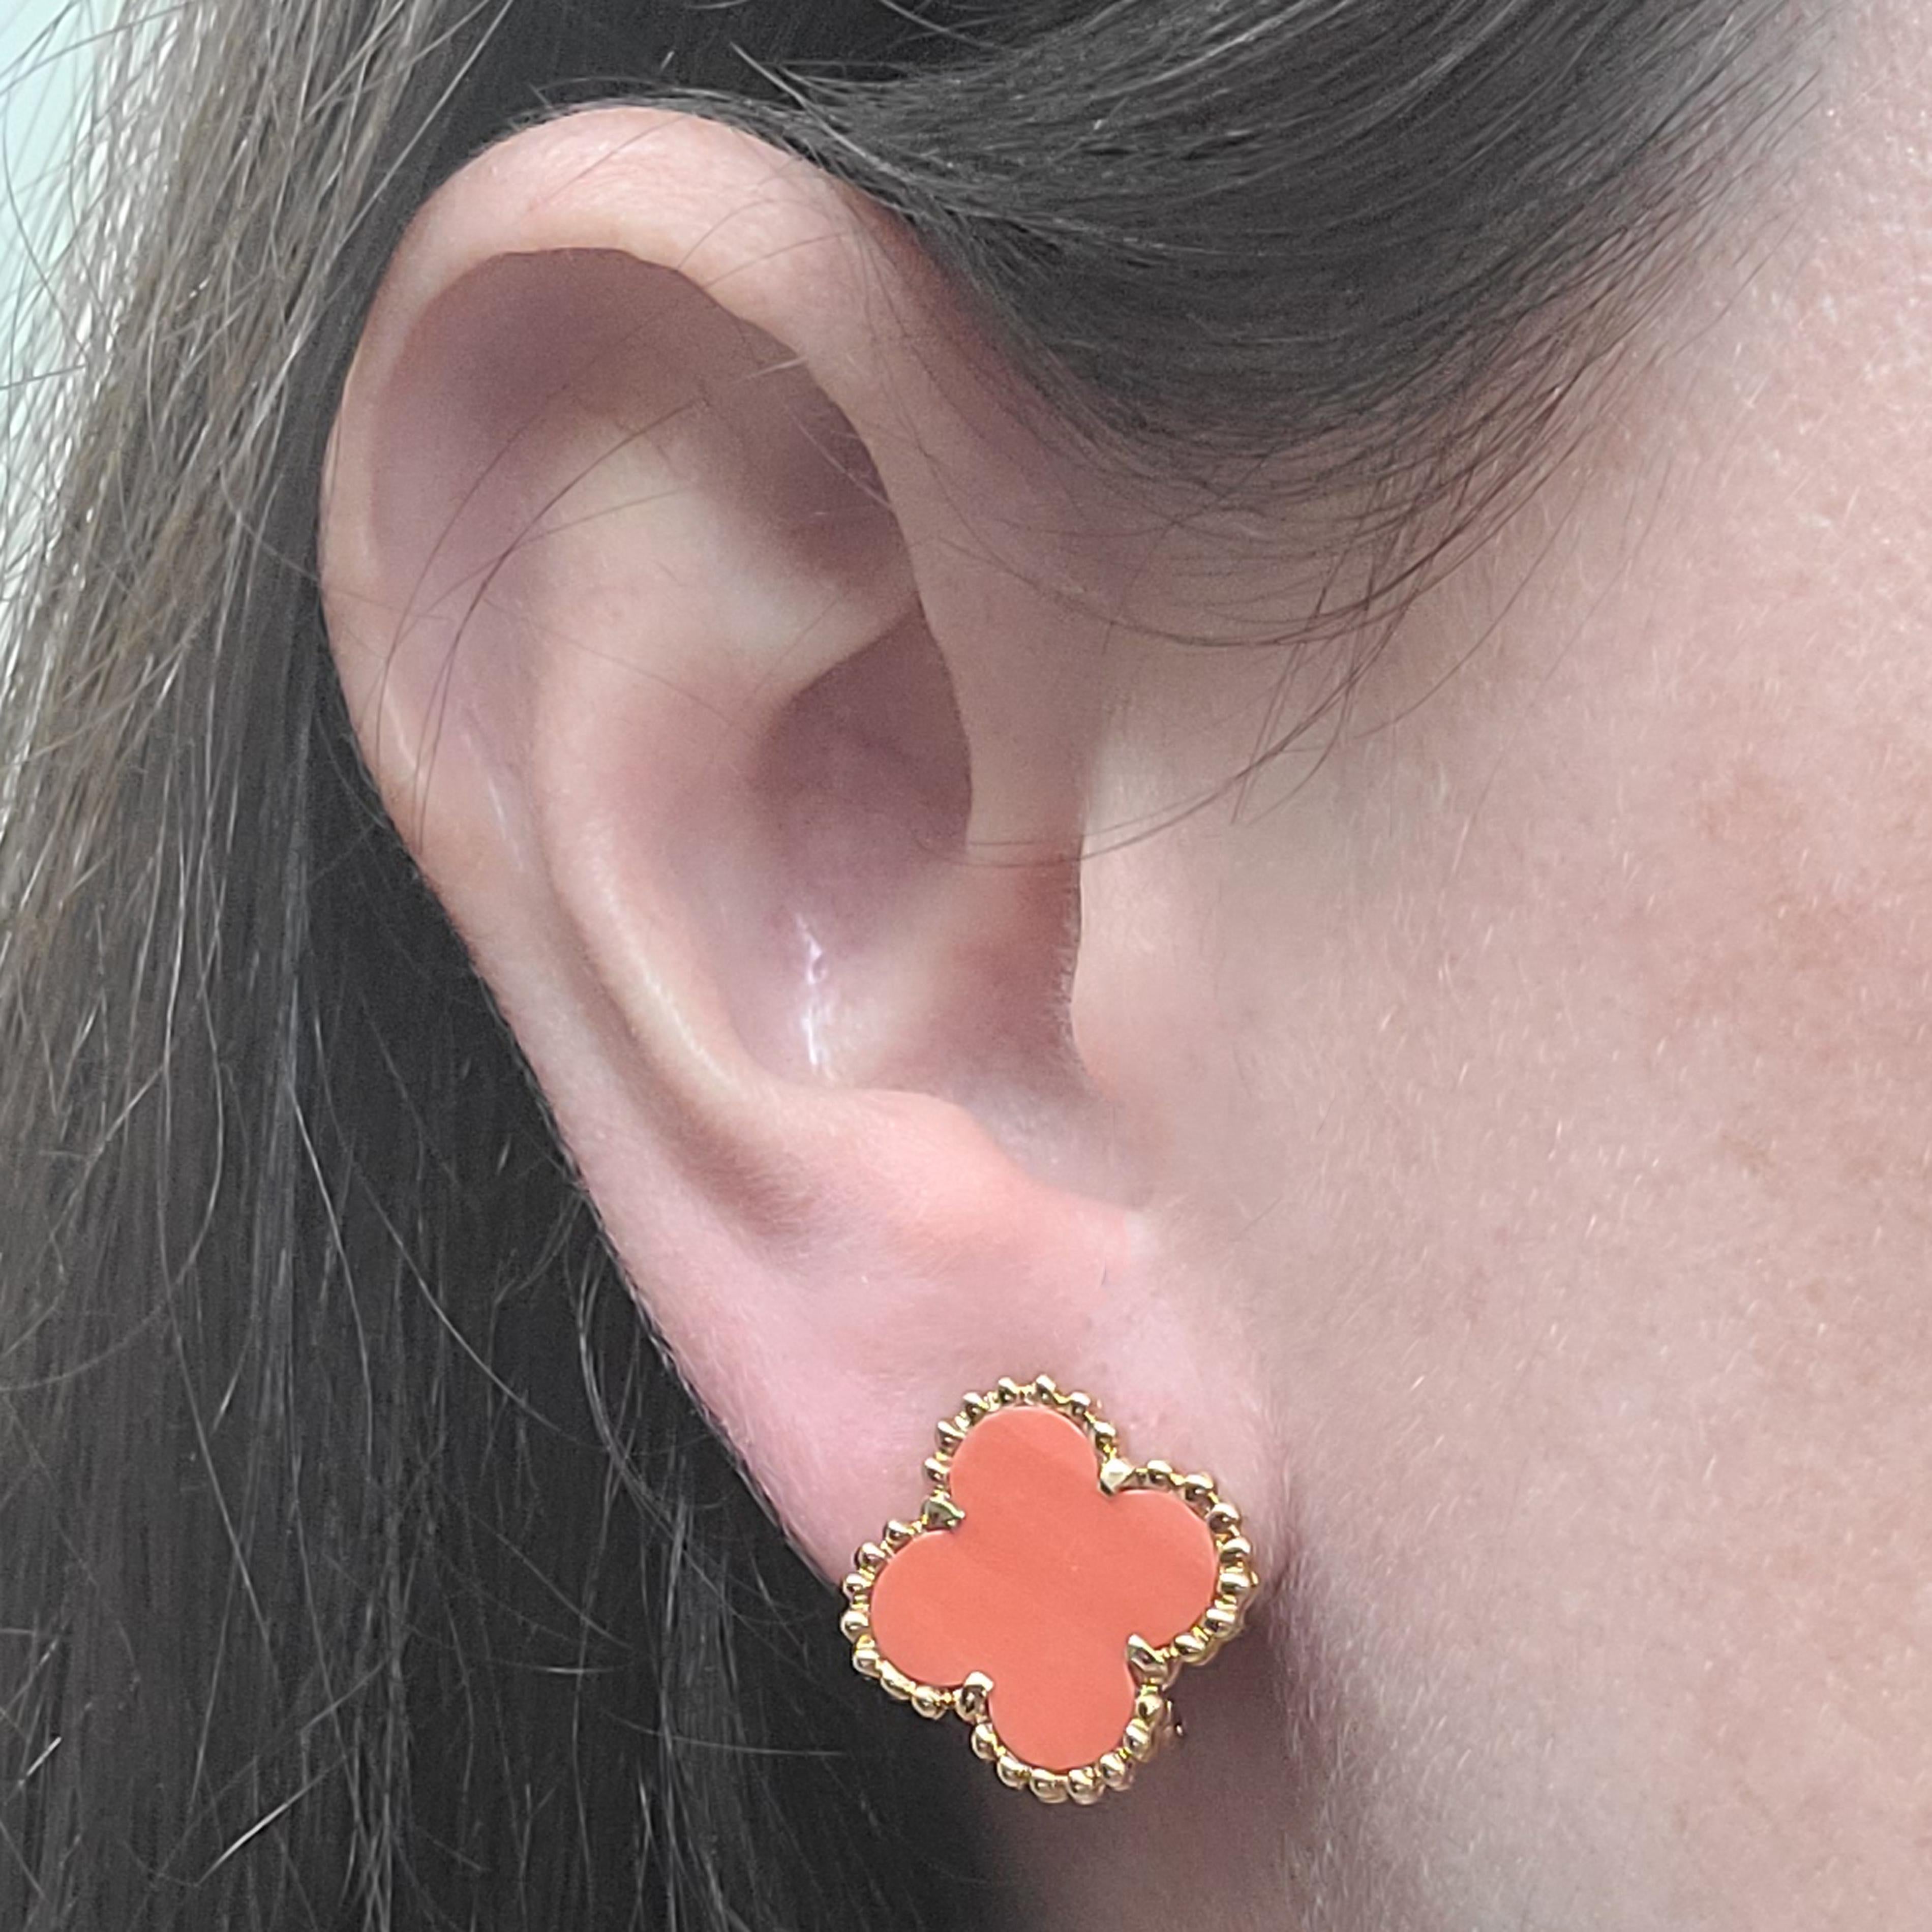 18 Karat Yellow Gold Earrings Featuring 2 Coral Flowers SImilar To Van Cleef & Arpels Alhambra Collection With Textured Edges. Collapsible Pierced Post With Omega Clip Backs. Finished Weight Is 8.0 Grams.

Matching Necklace Also Available.